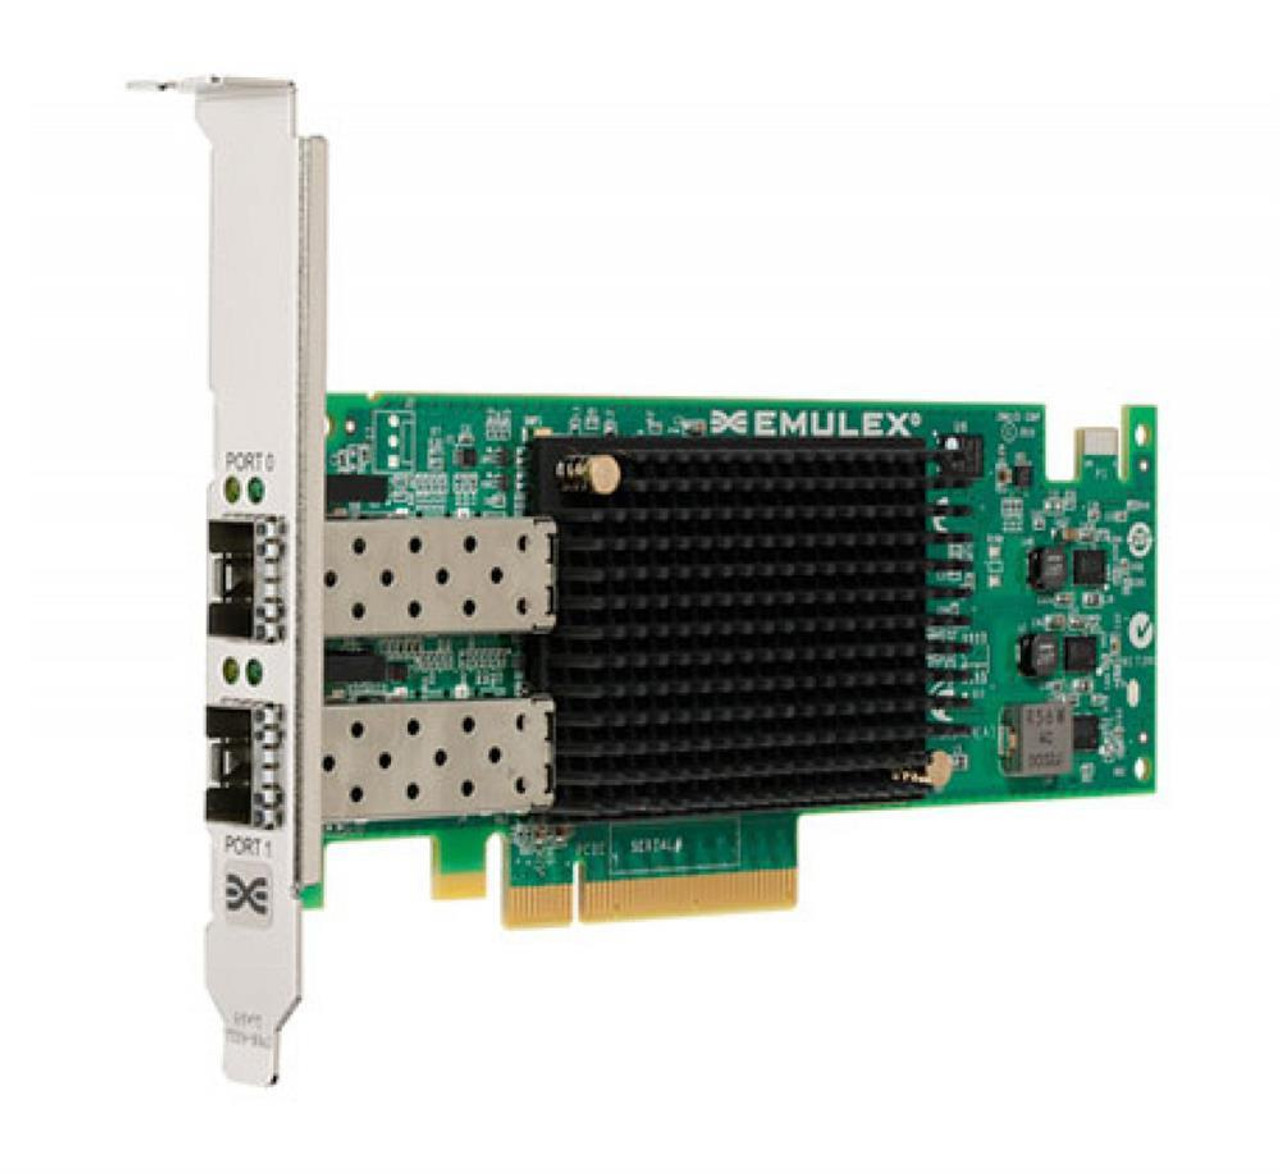 90Y6456-01 IBM Dual-Ports SFP+ 10Gbps Gigabit Ethernet Embedded Network Adapter VFA III X by Emulex for System